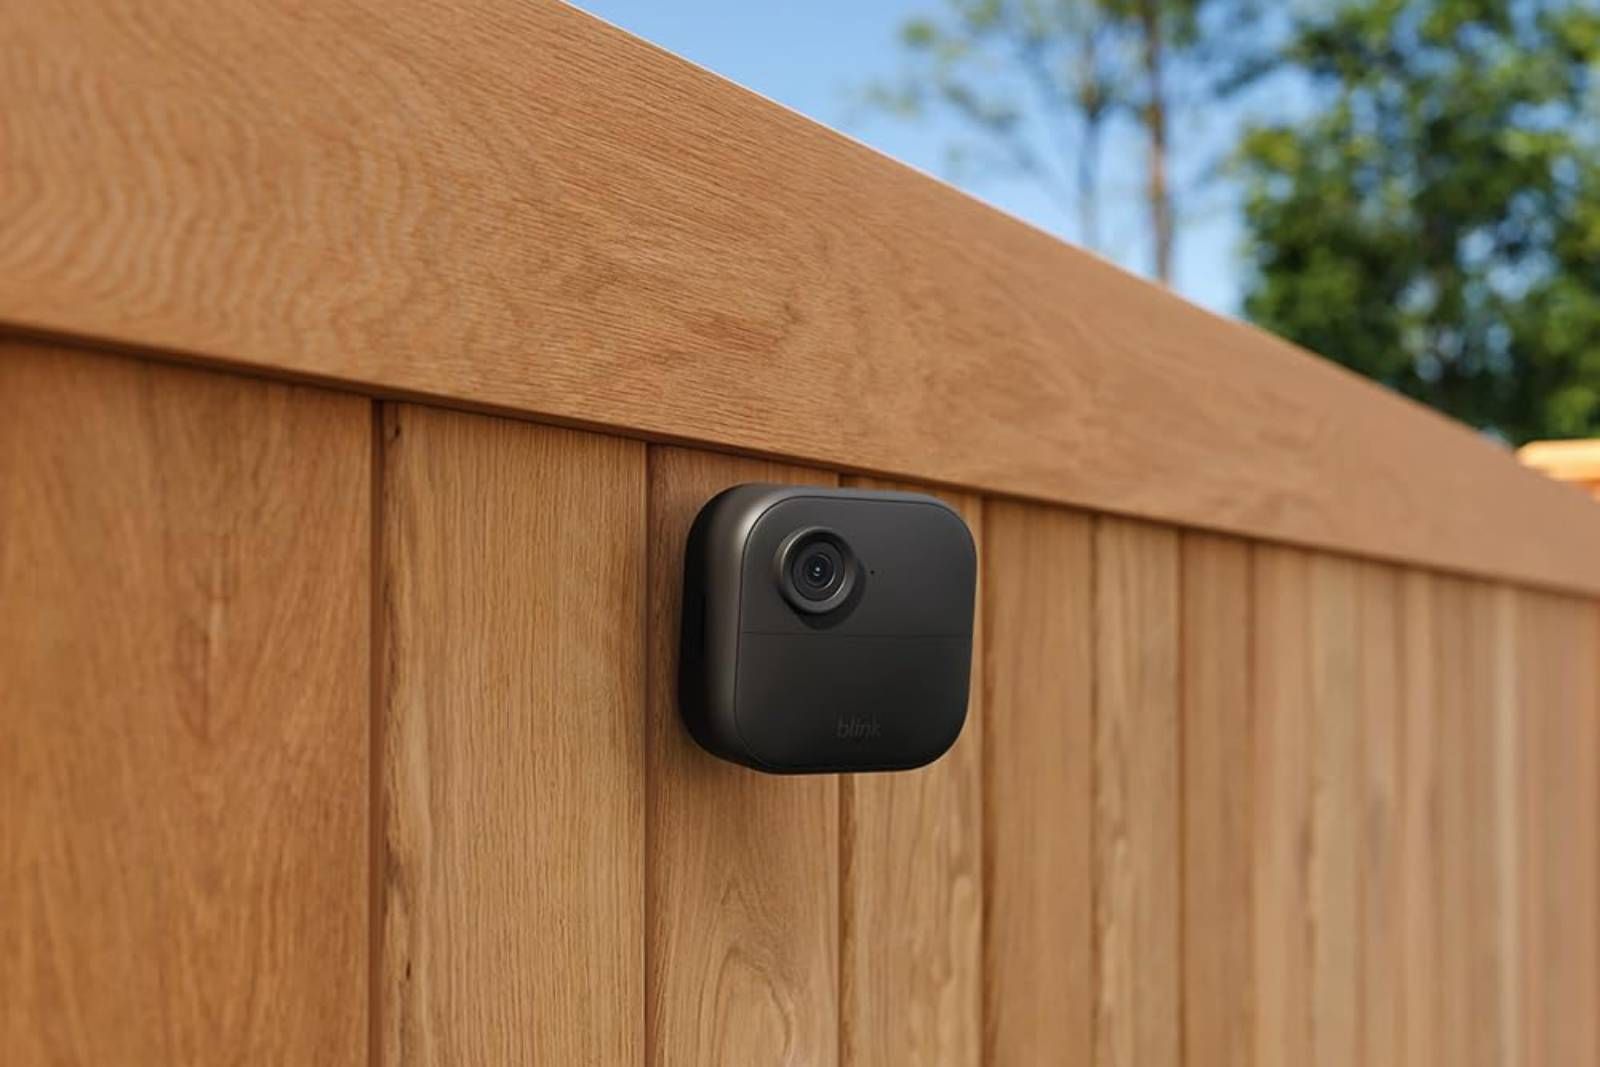 Best Amazon Black Friday deals: Save $200 on Blink cameras now